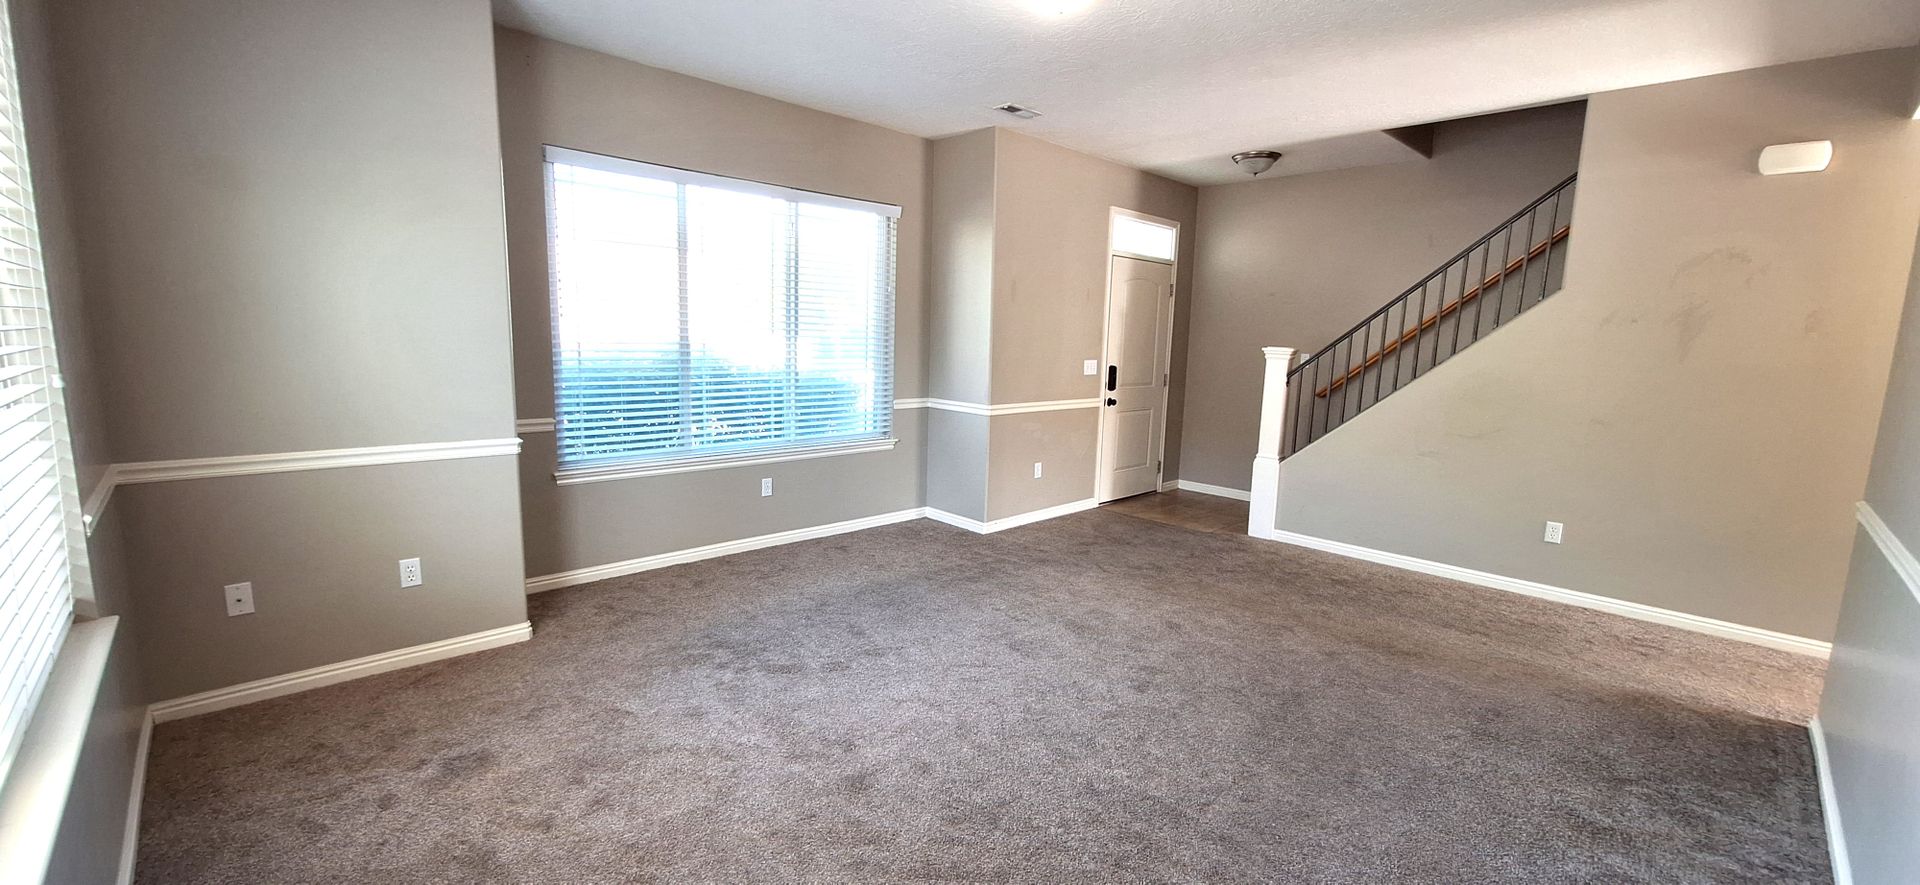 Spacious End Unit Townhome - A must see!